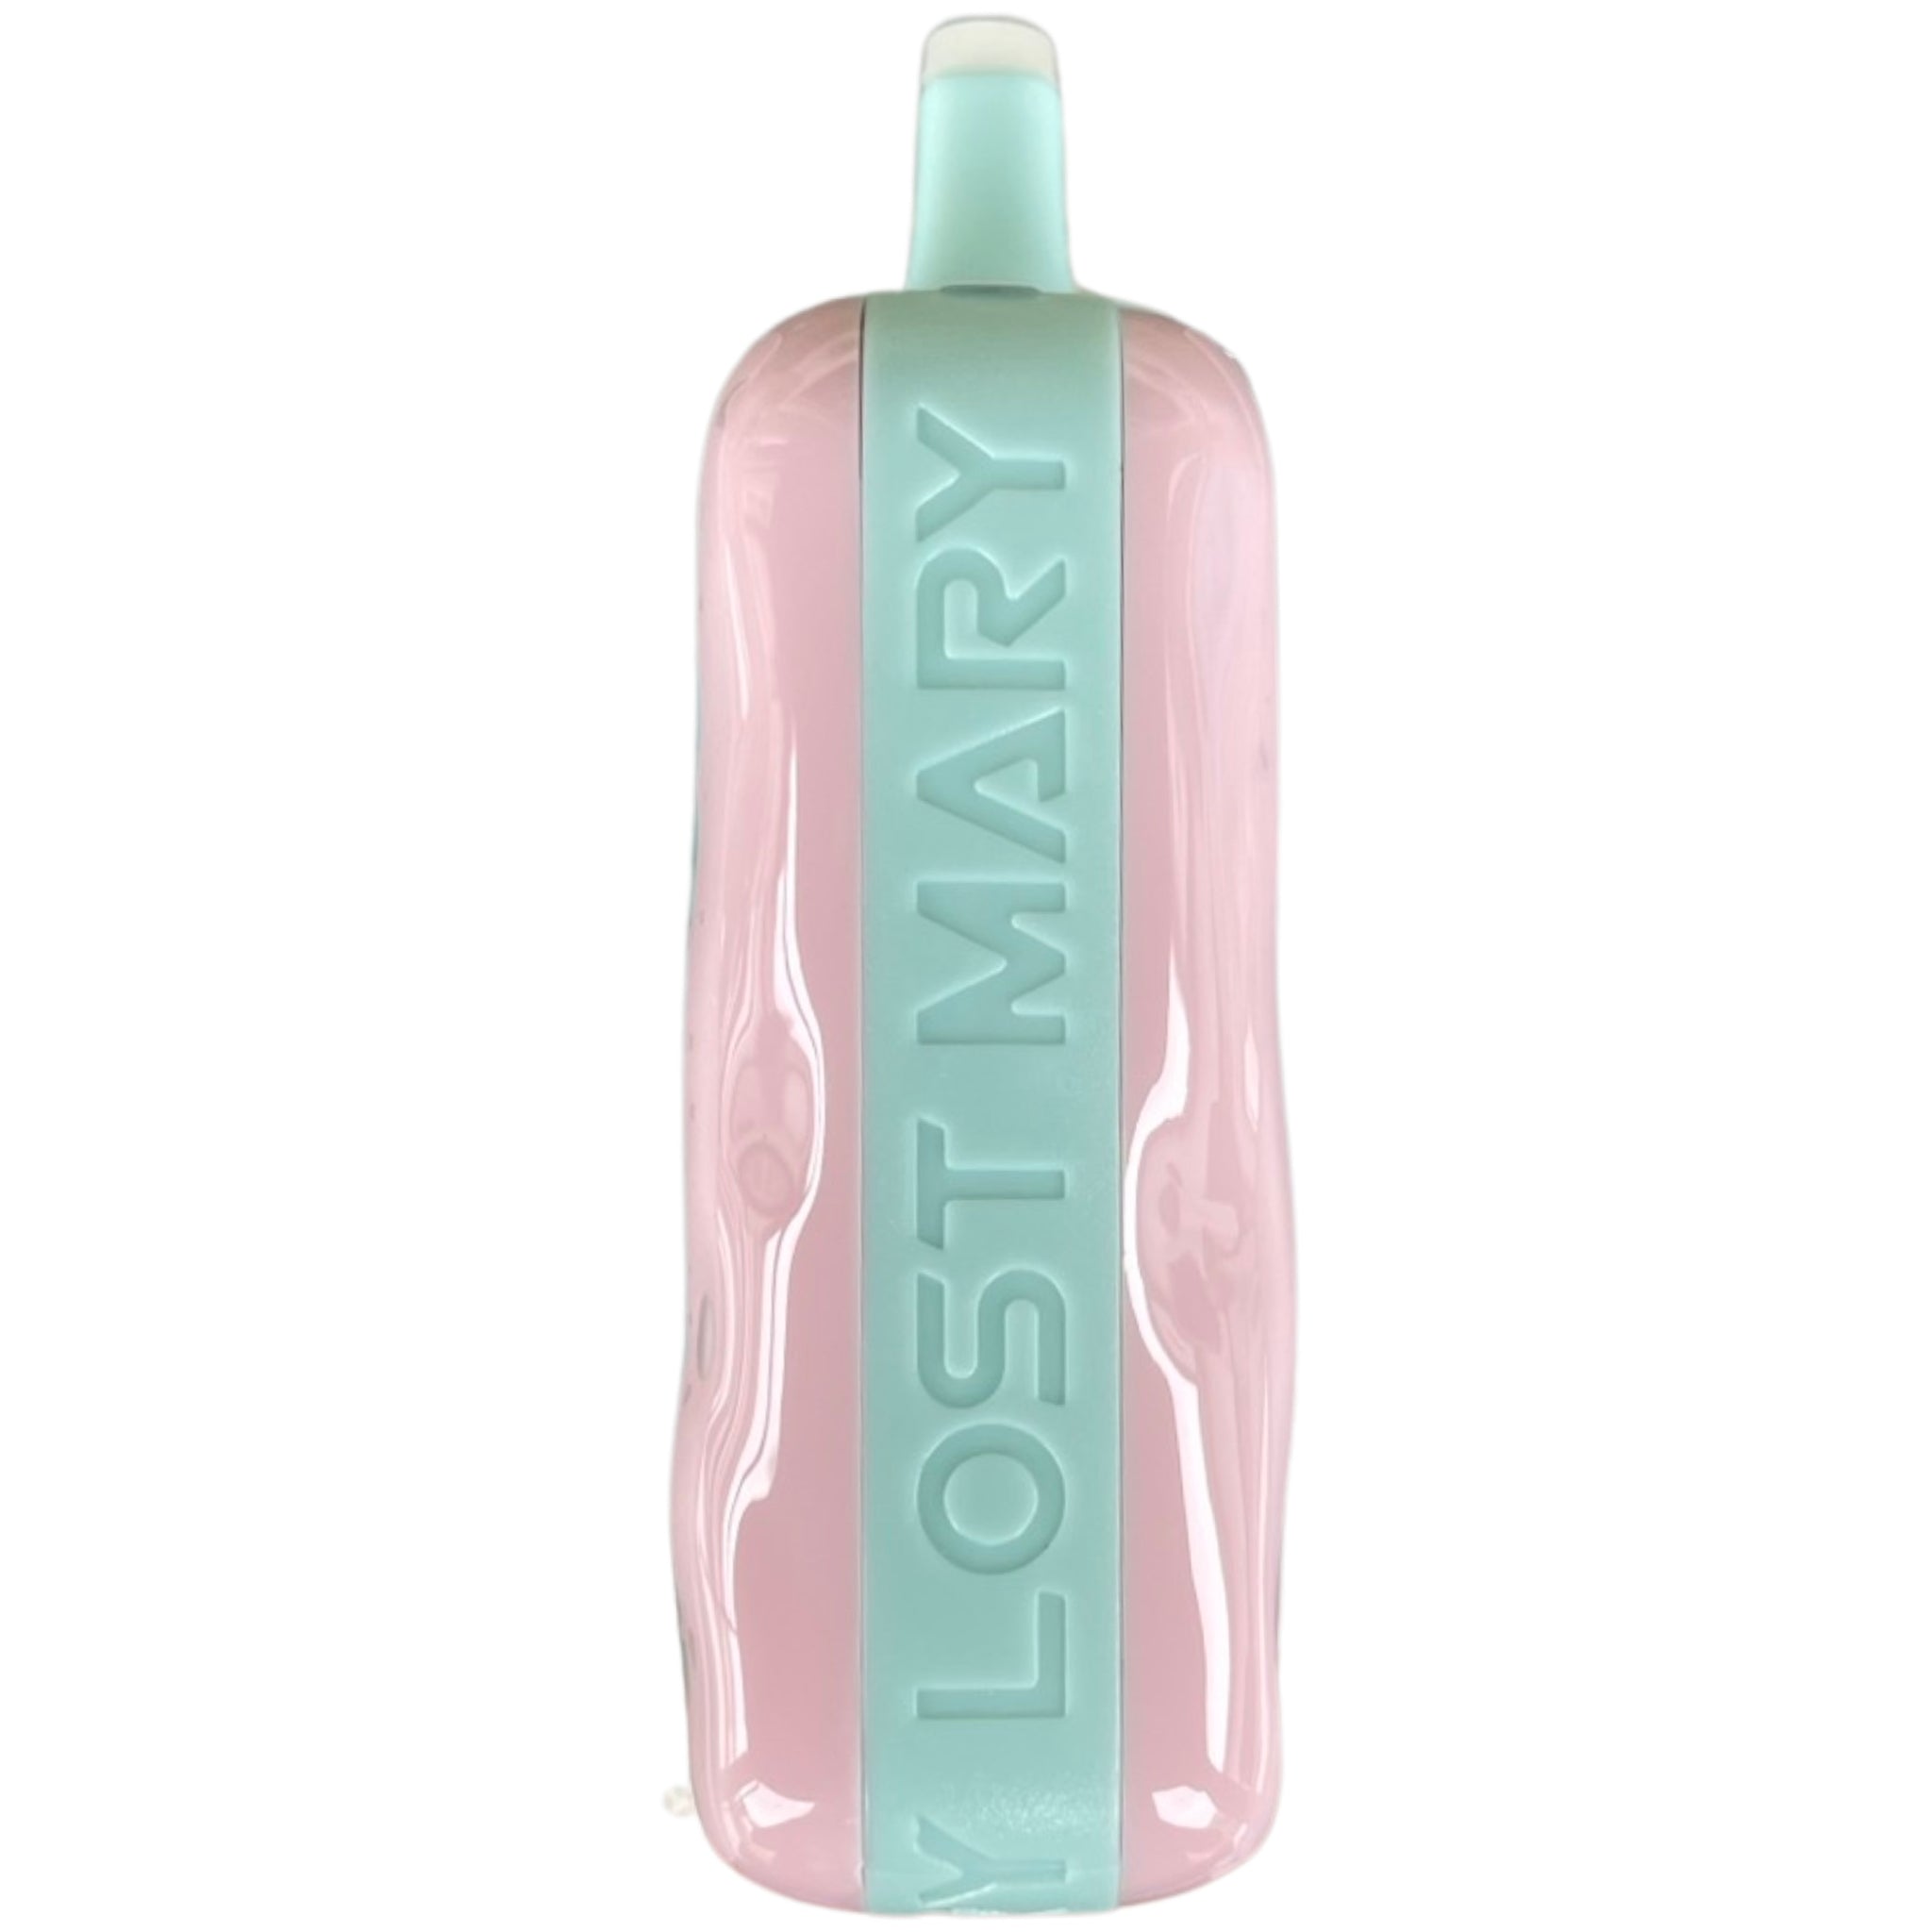 Cotton Candy Lost Mary OS5000 Vape - Vapor Puffs